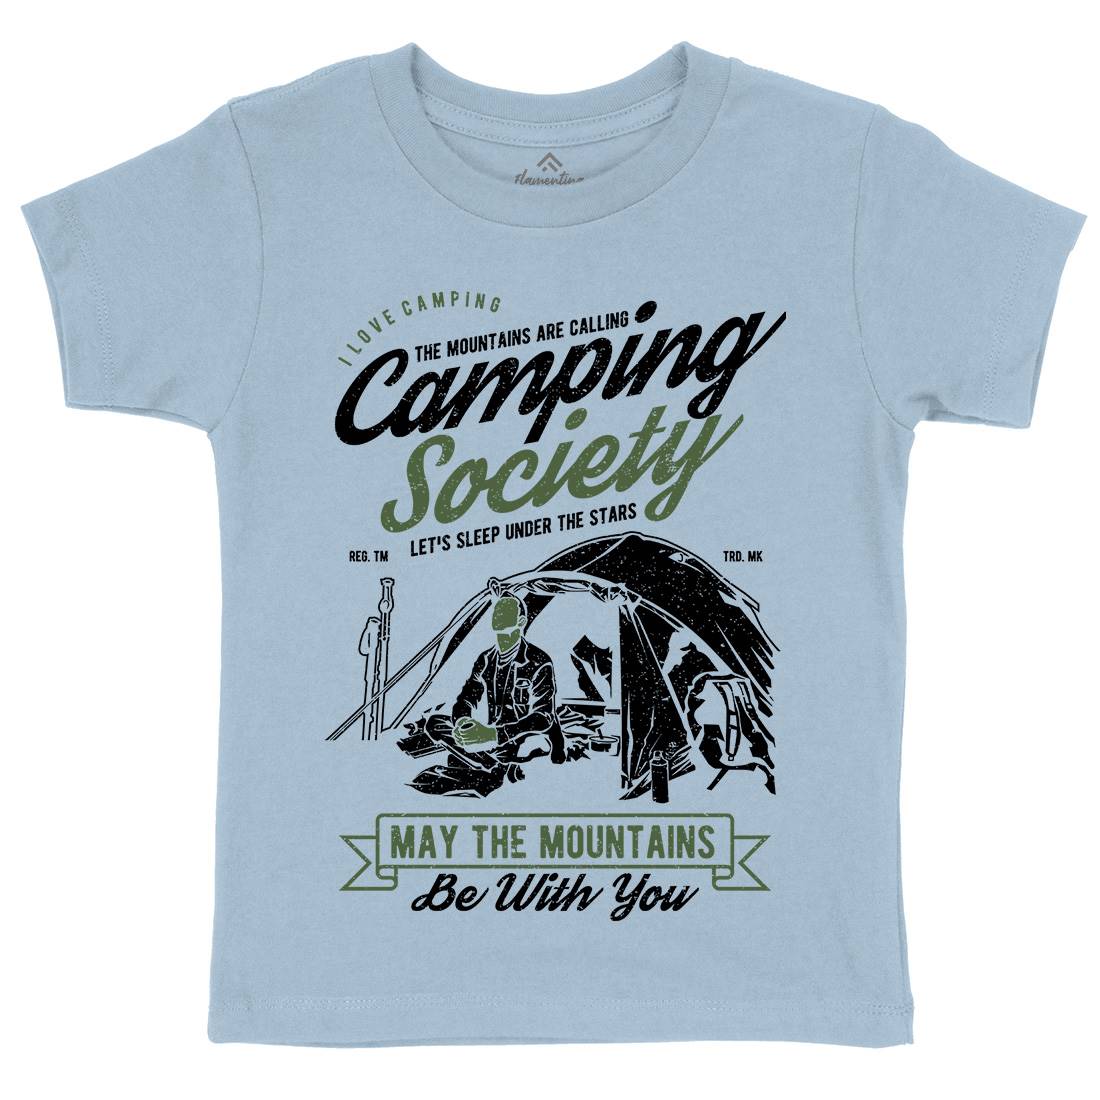 Camping Society Kids Crew Neck T-Shirt Nature A631